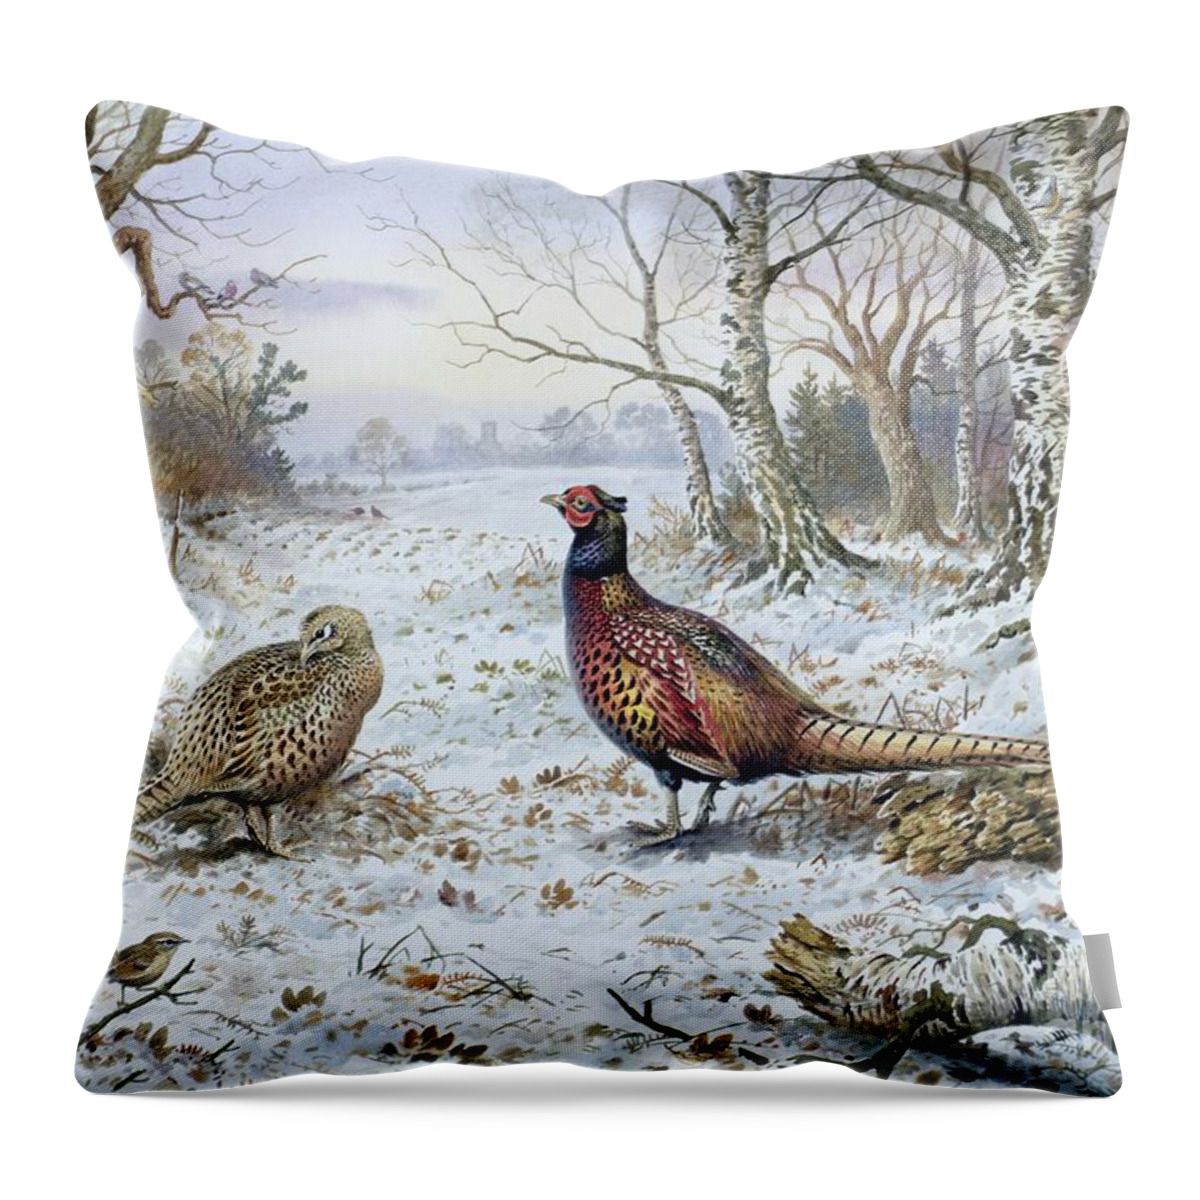 Game Bird; Snow; Woodland; Perdrix; Faisan; Troglodyte; Pheasant; Pheasants; Tree; Trees; Bird; Animals Throw Pillow featuring the painting Pair of Pheasants with a Wren by Carl Donner